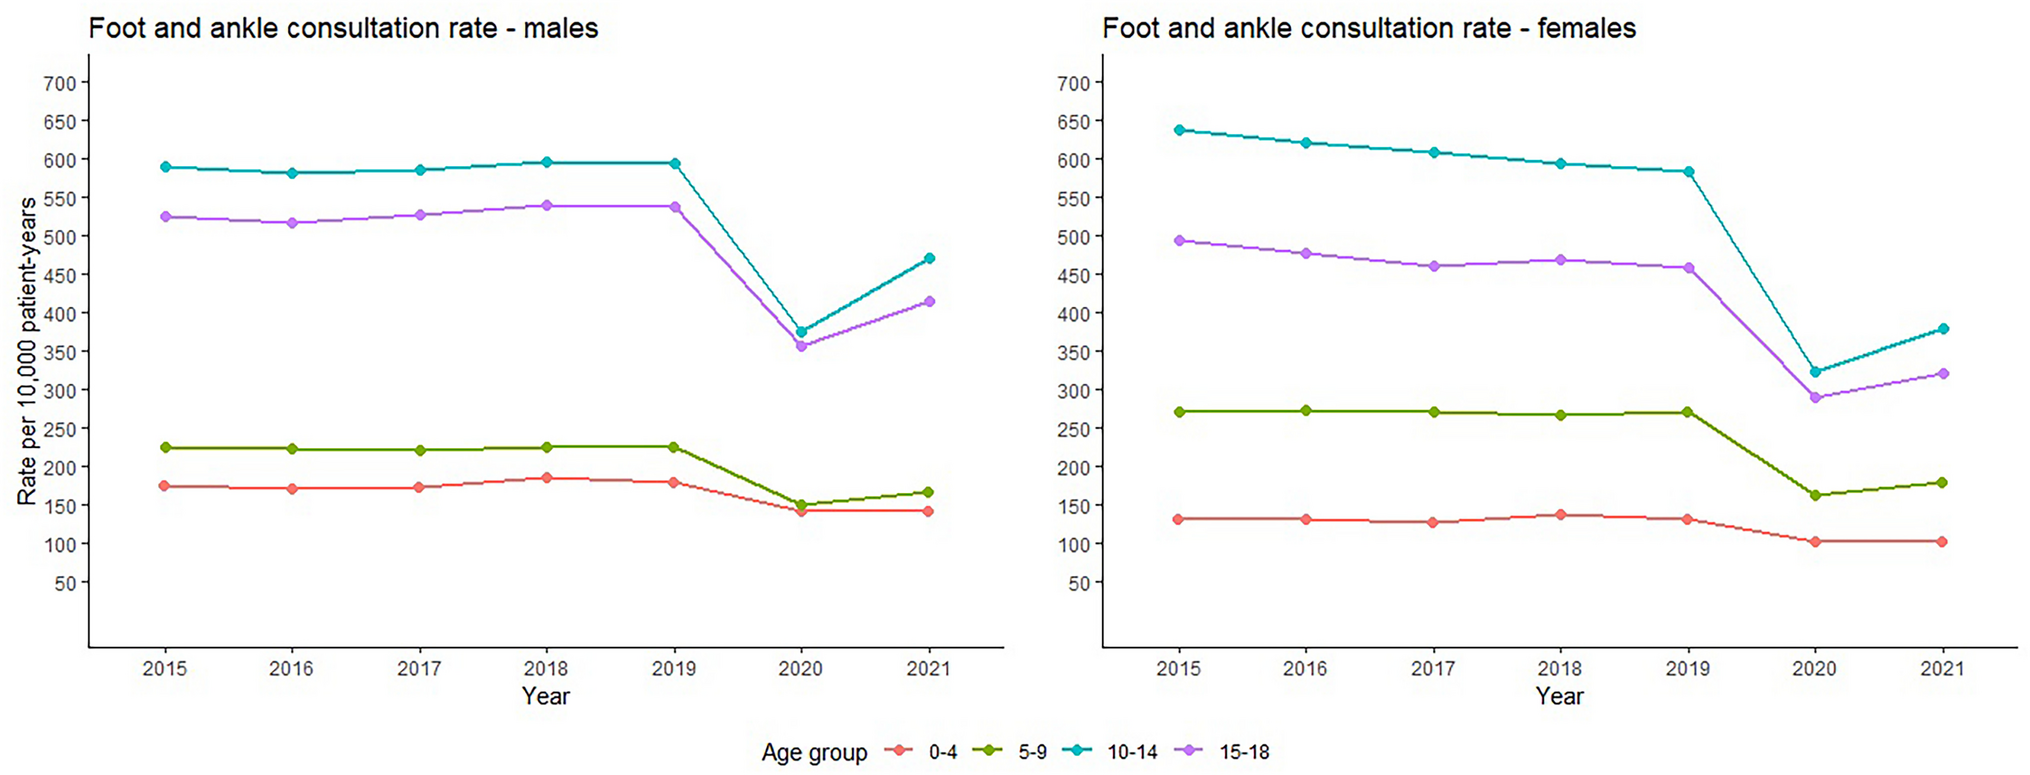 Foot and ankle problems in children and young people: a population-based cohort study